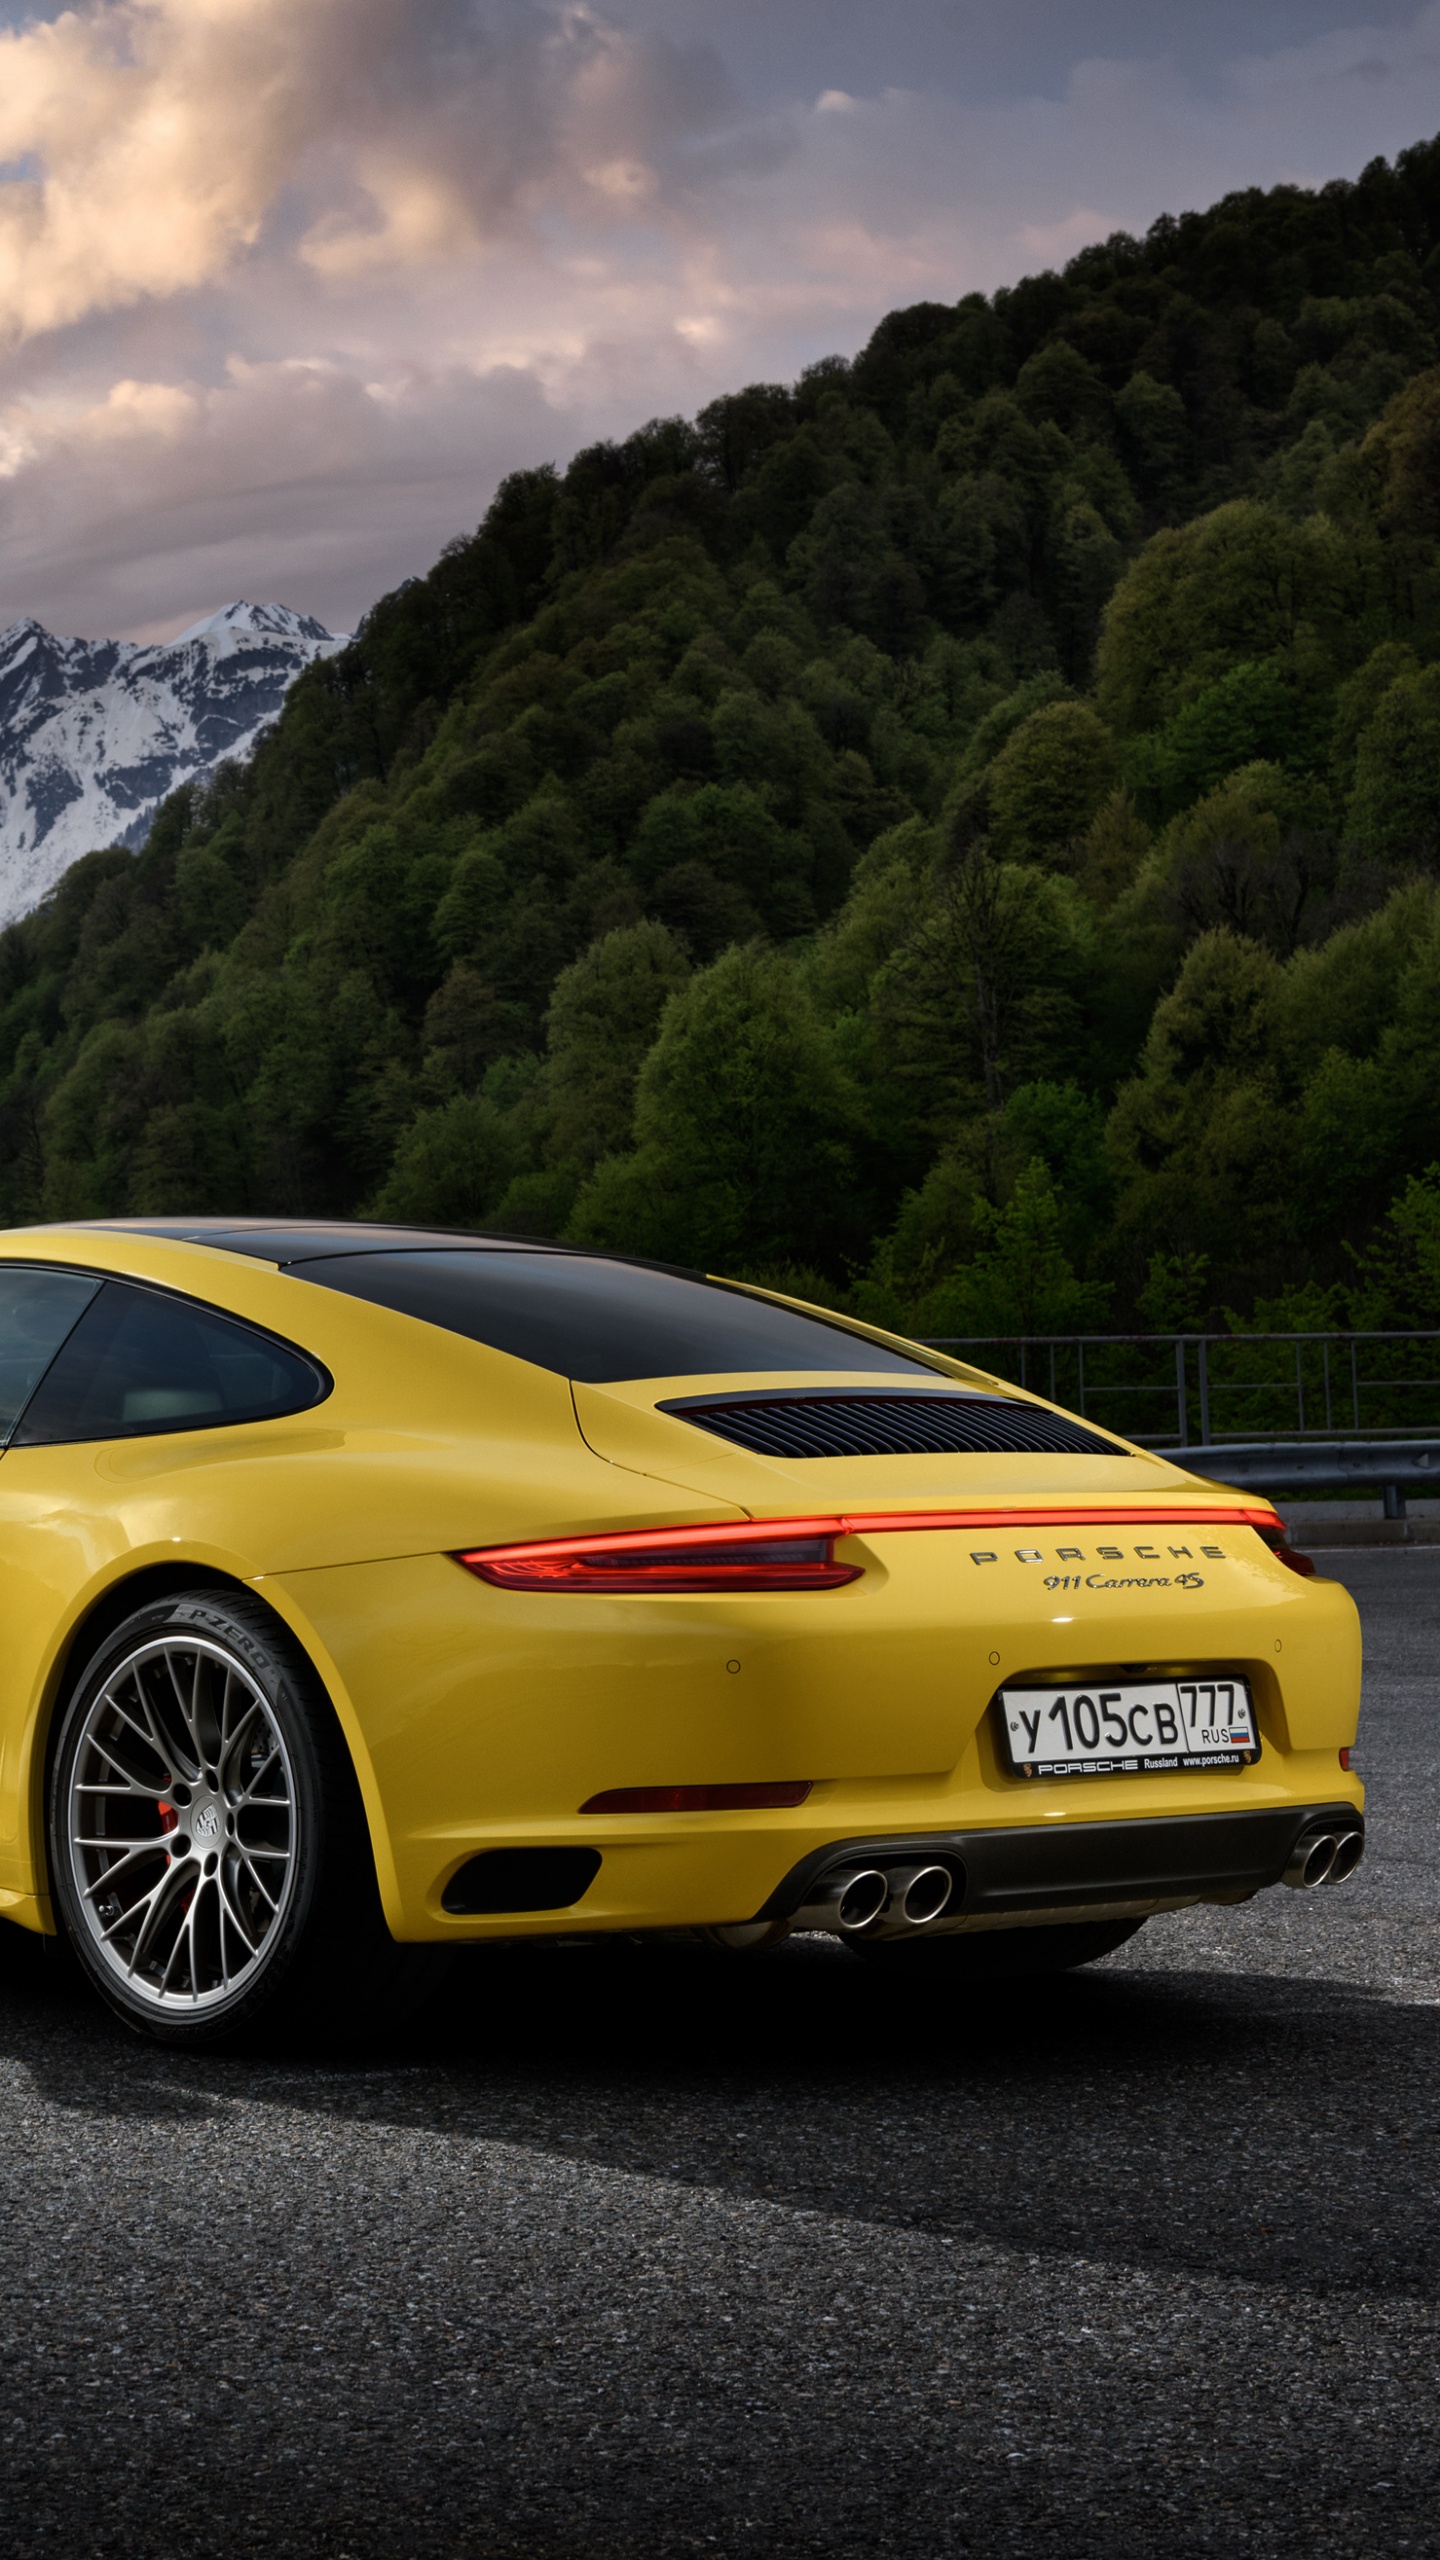 Yellow Porsche 911 on Road Near Mountain During Daytime. Wallpaper in 1440x2560 Resolution